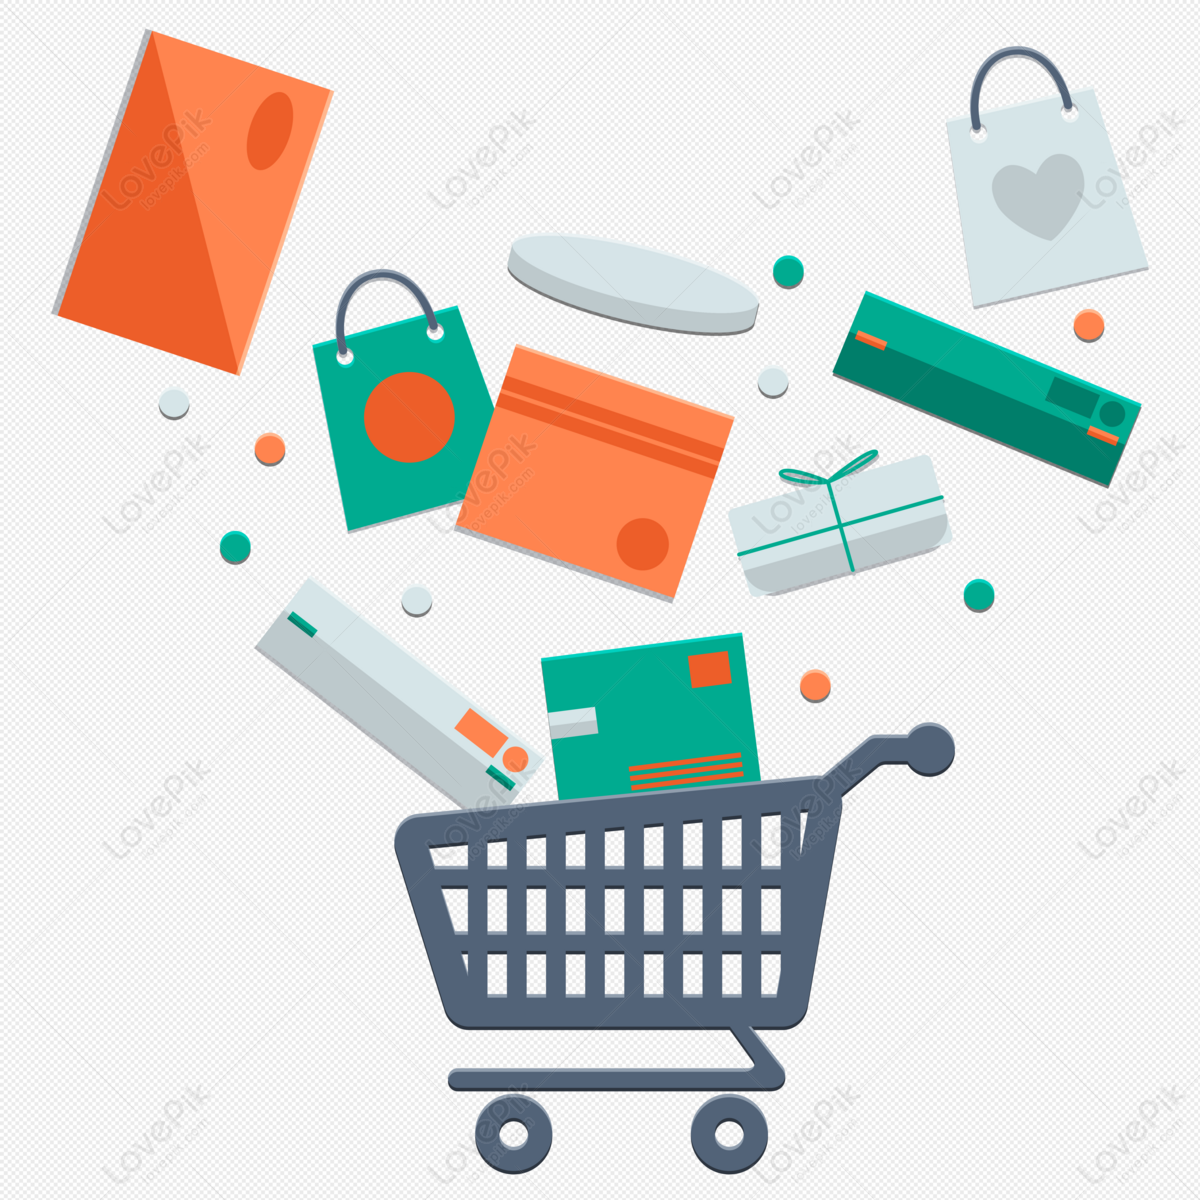 Cartoon Flat Double Eleven Shopping Cart Elements PNG Hd Transparent Image  And Clipart Image For Free Download - Lovepik | 400831944